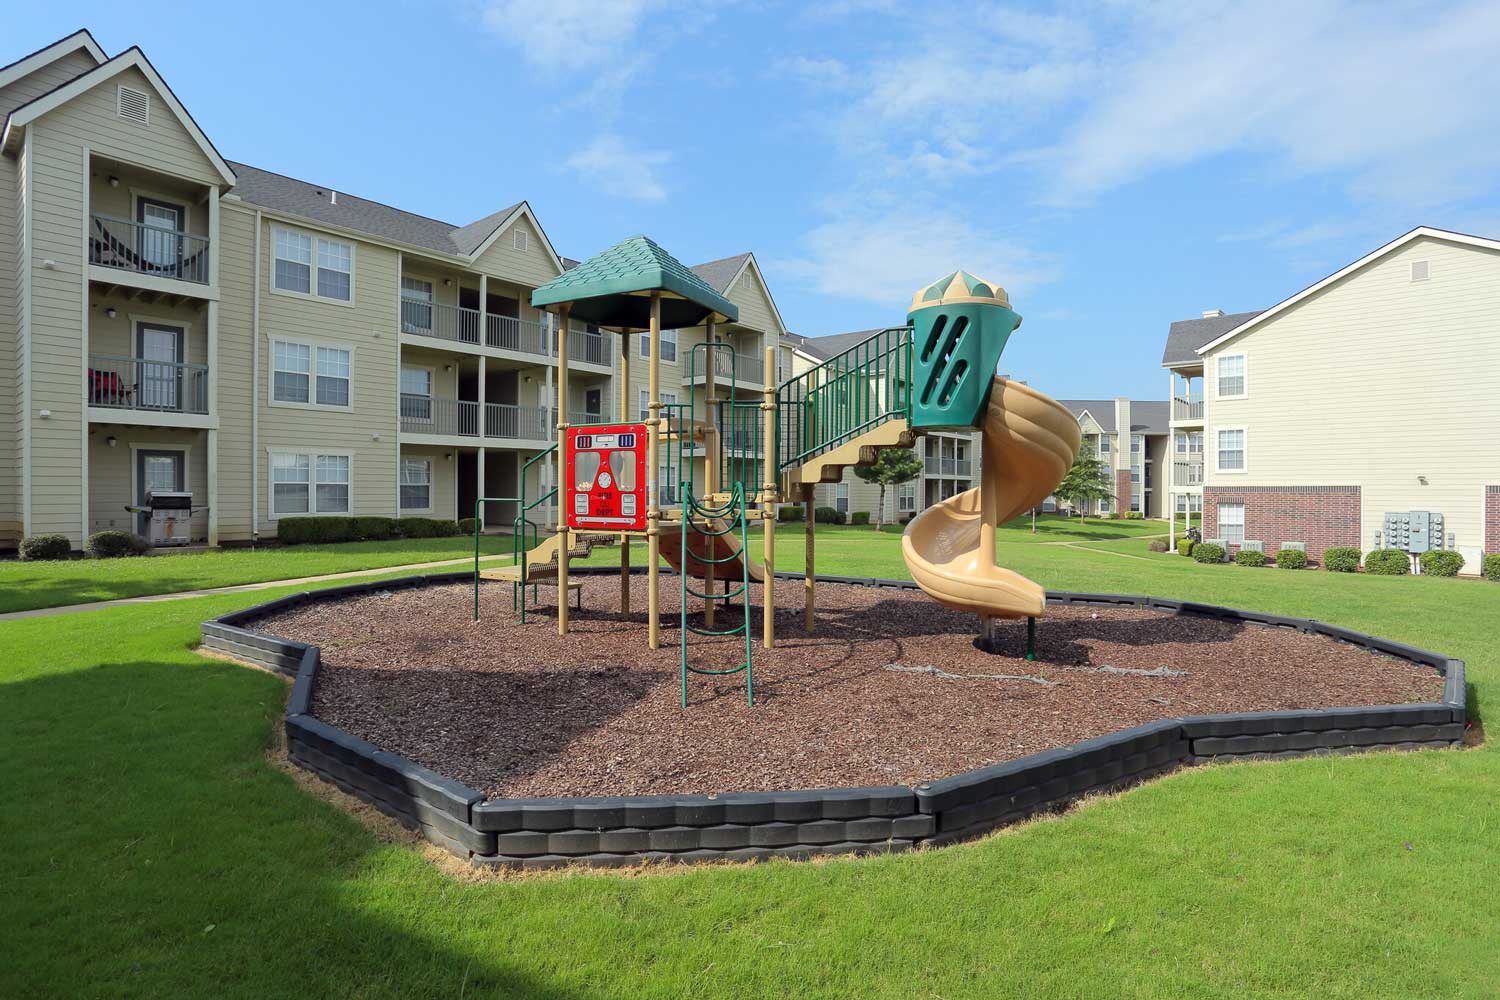 Children's Playground at the Oakmont Apartment Homes in Catoosa, OK